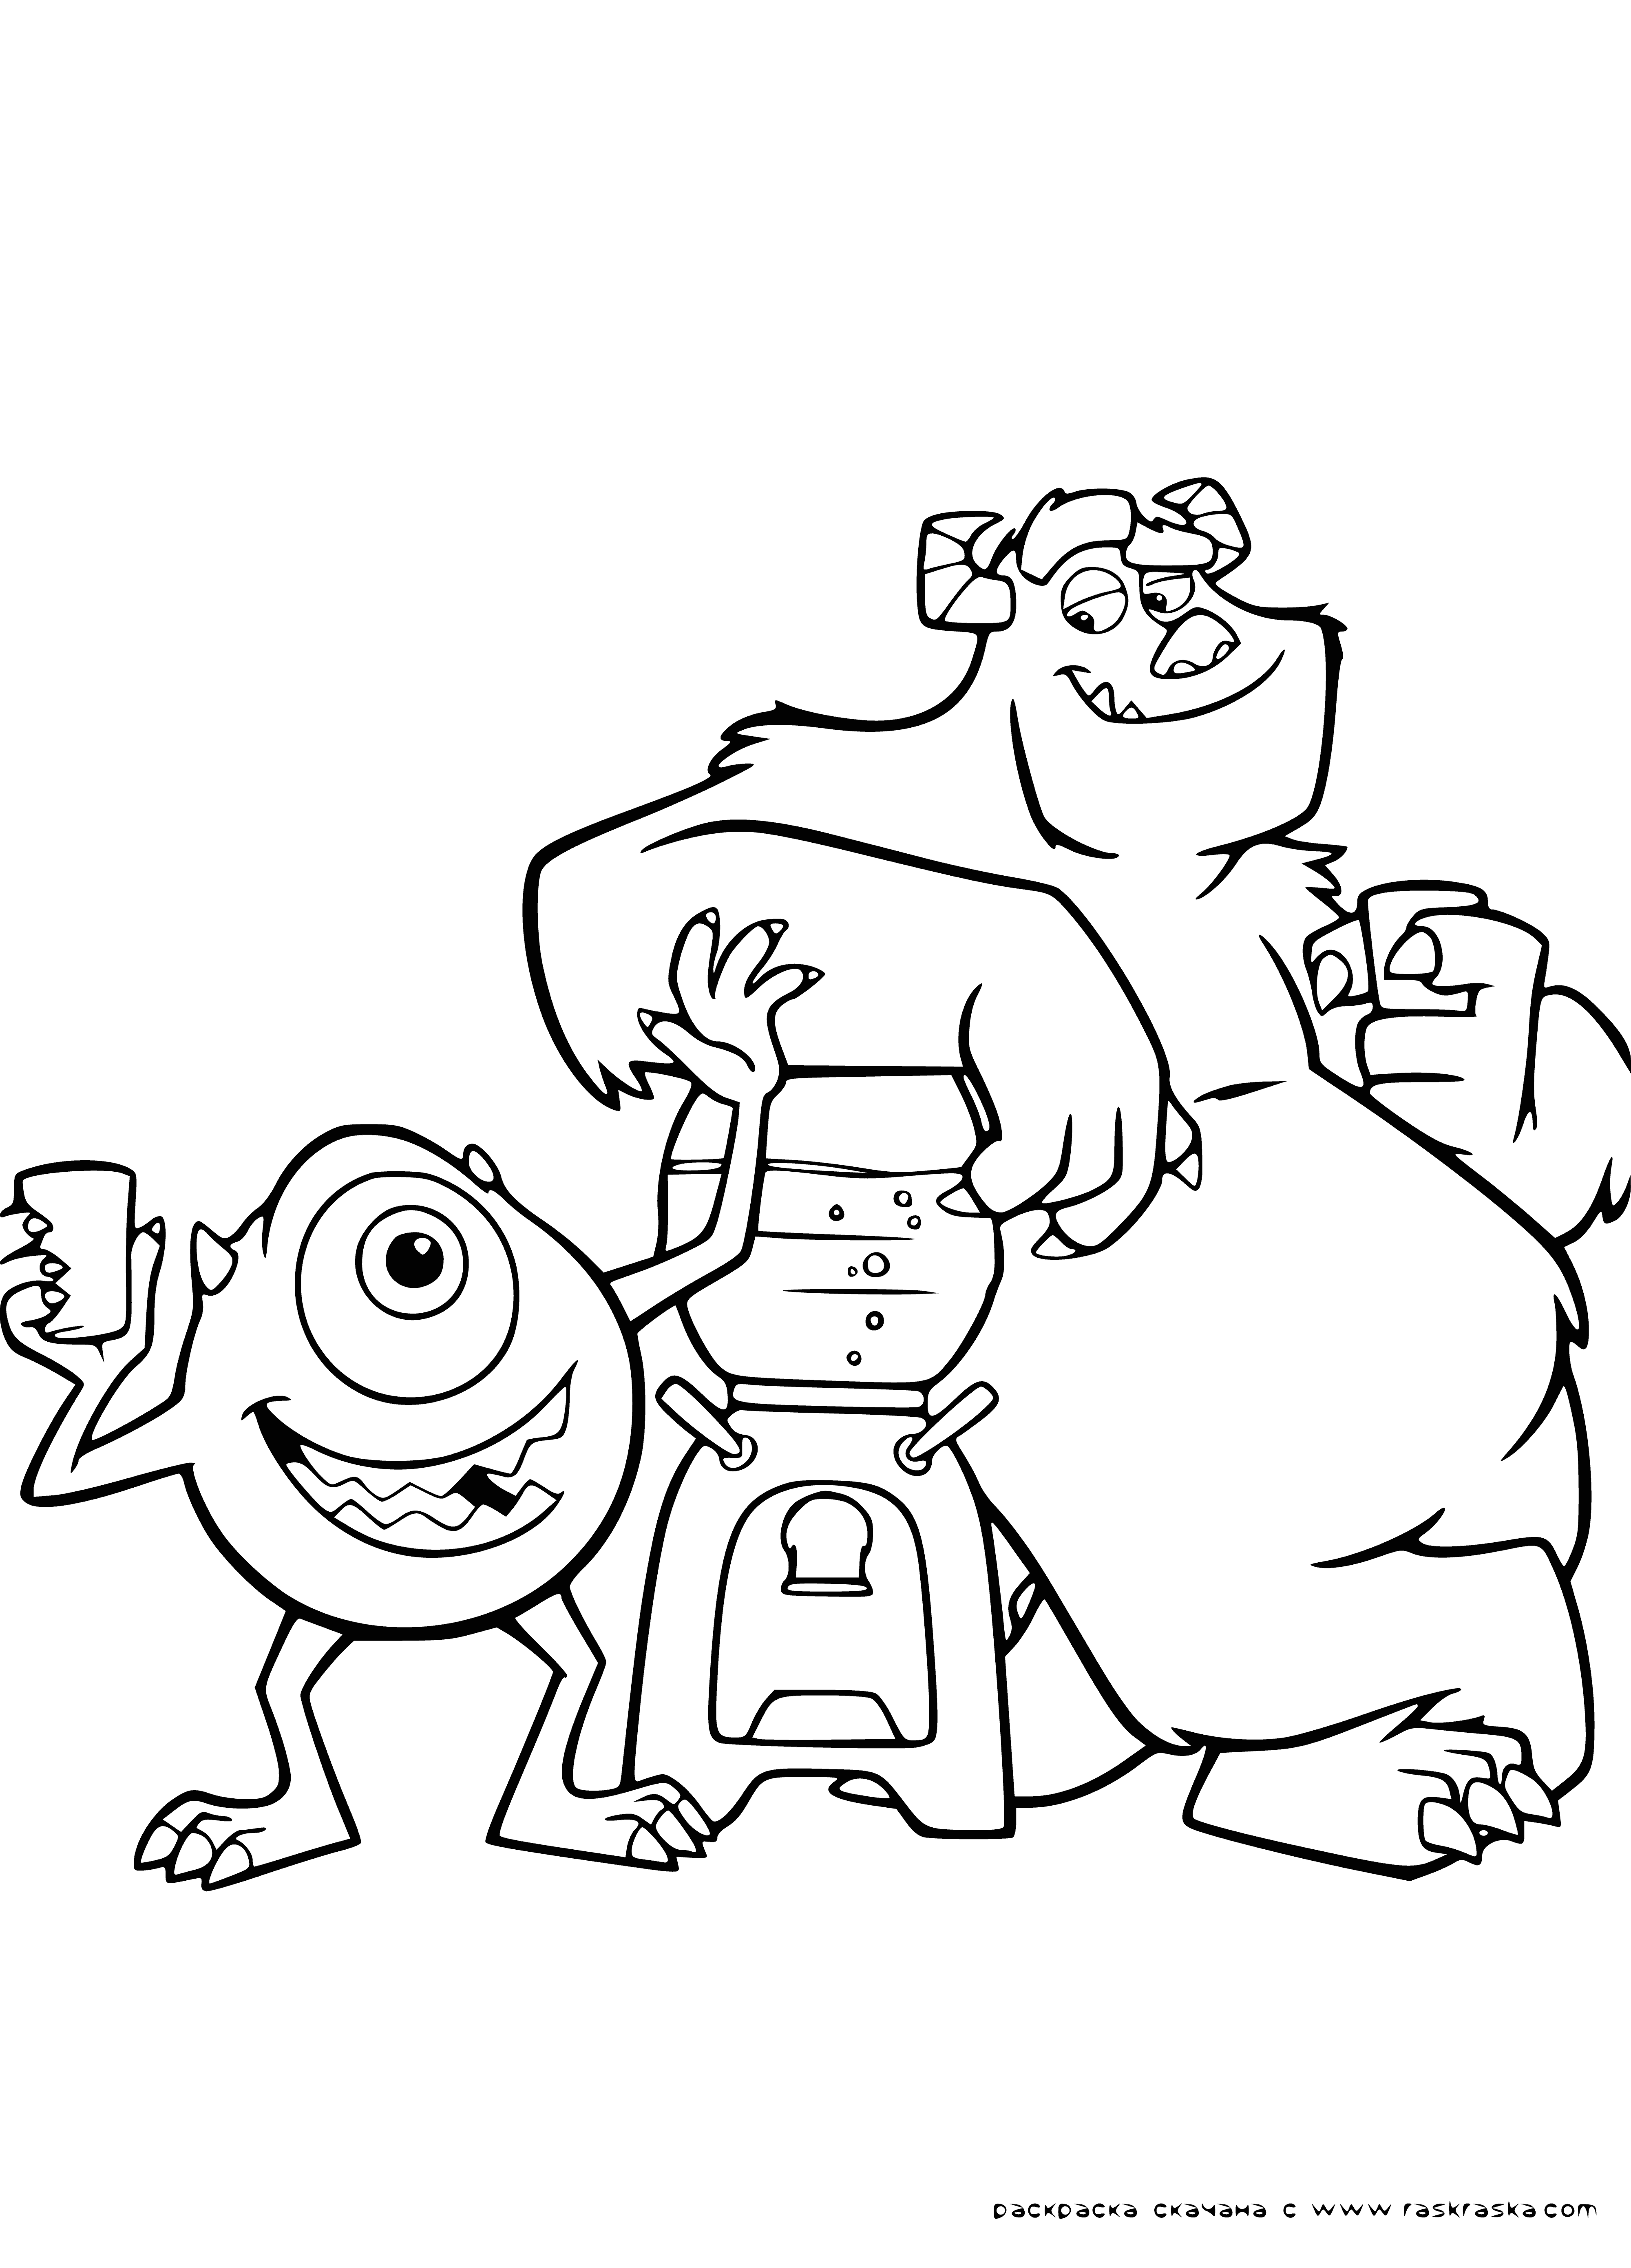 coloring page: Two figures in a coloring page: a big blue multi-eyed creature holding a small yellow one with big eyes & a blue ball.